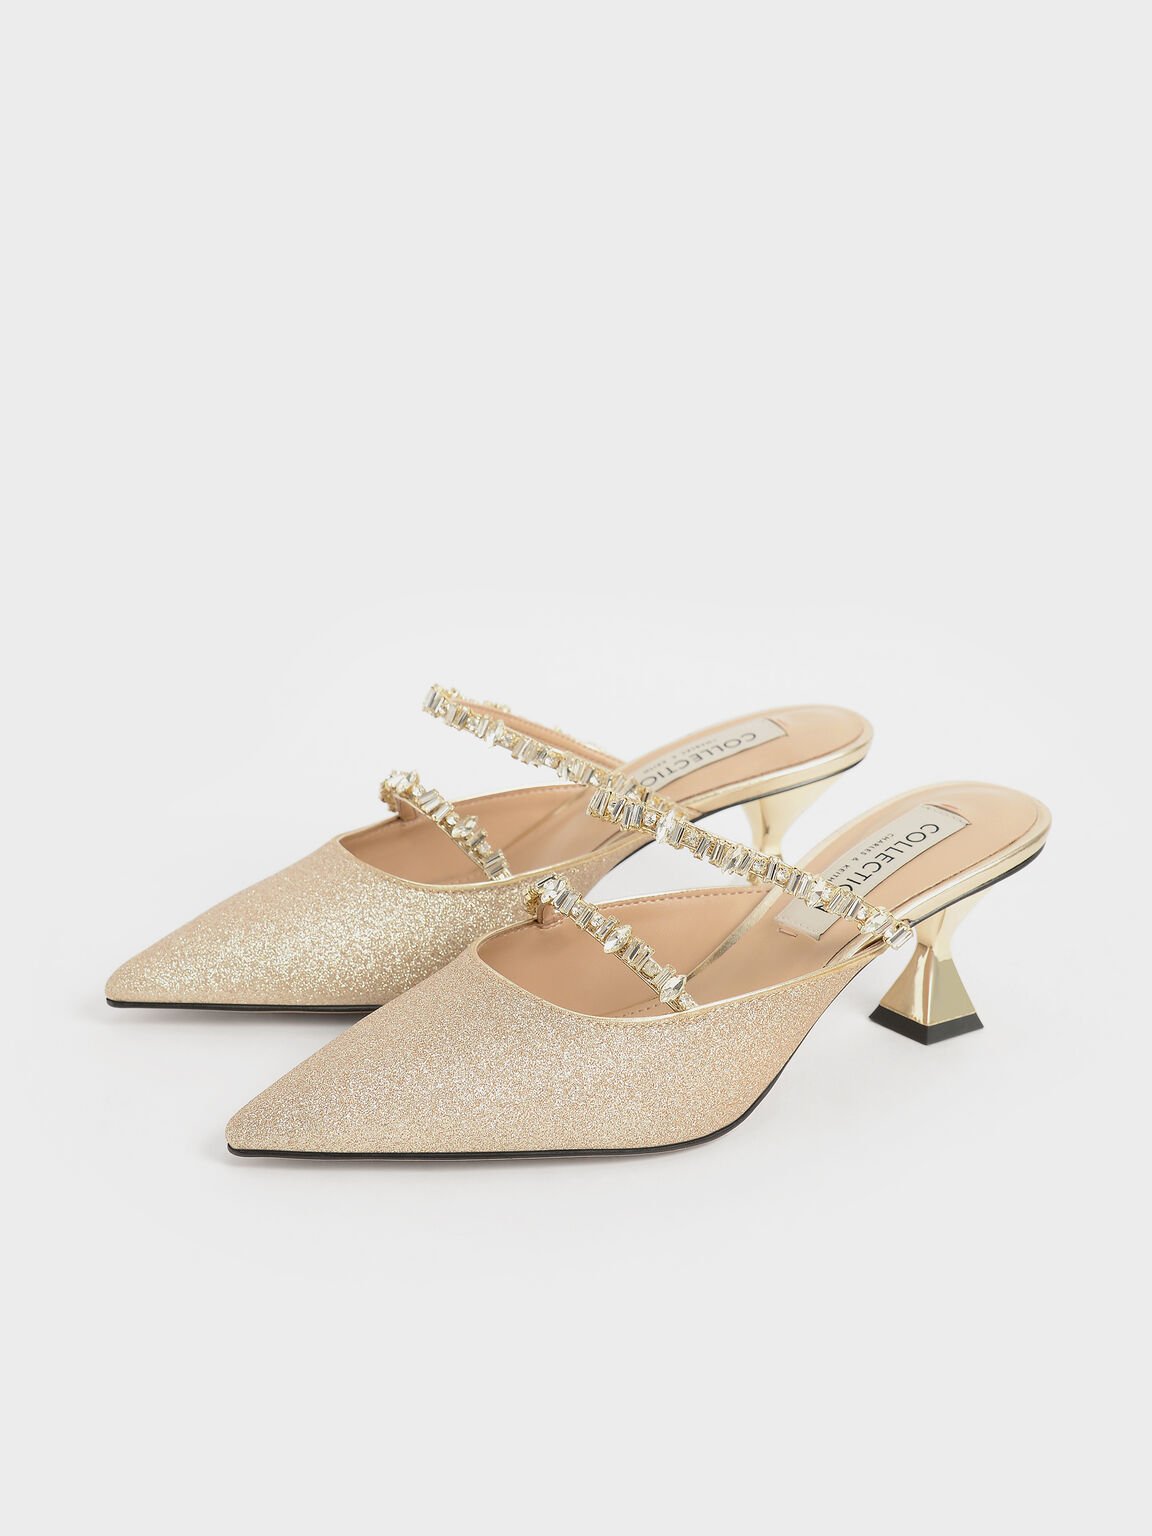 Wedding Collection: Gem-Encrusted Metallic Glittered Mules, Gold, hi-res